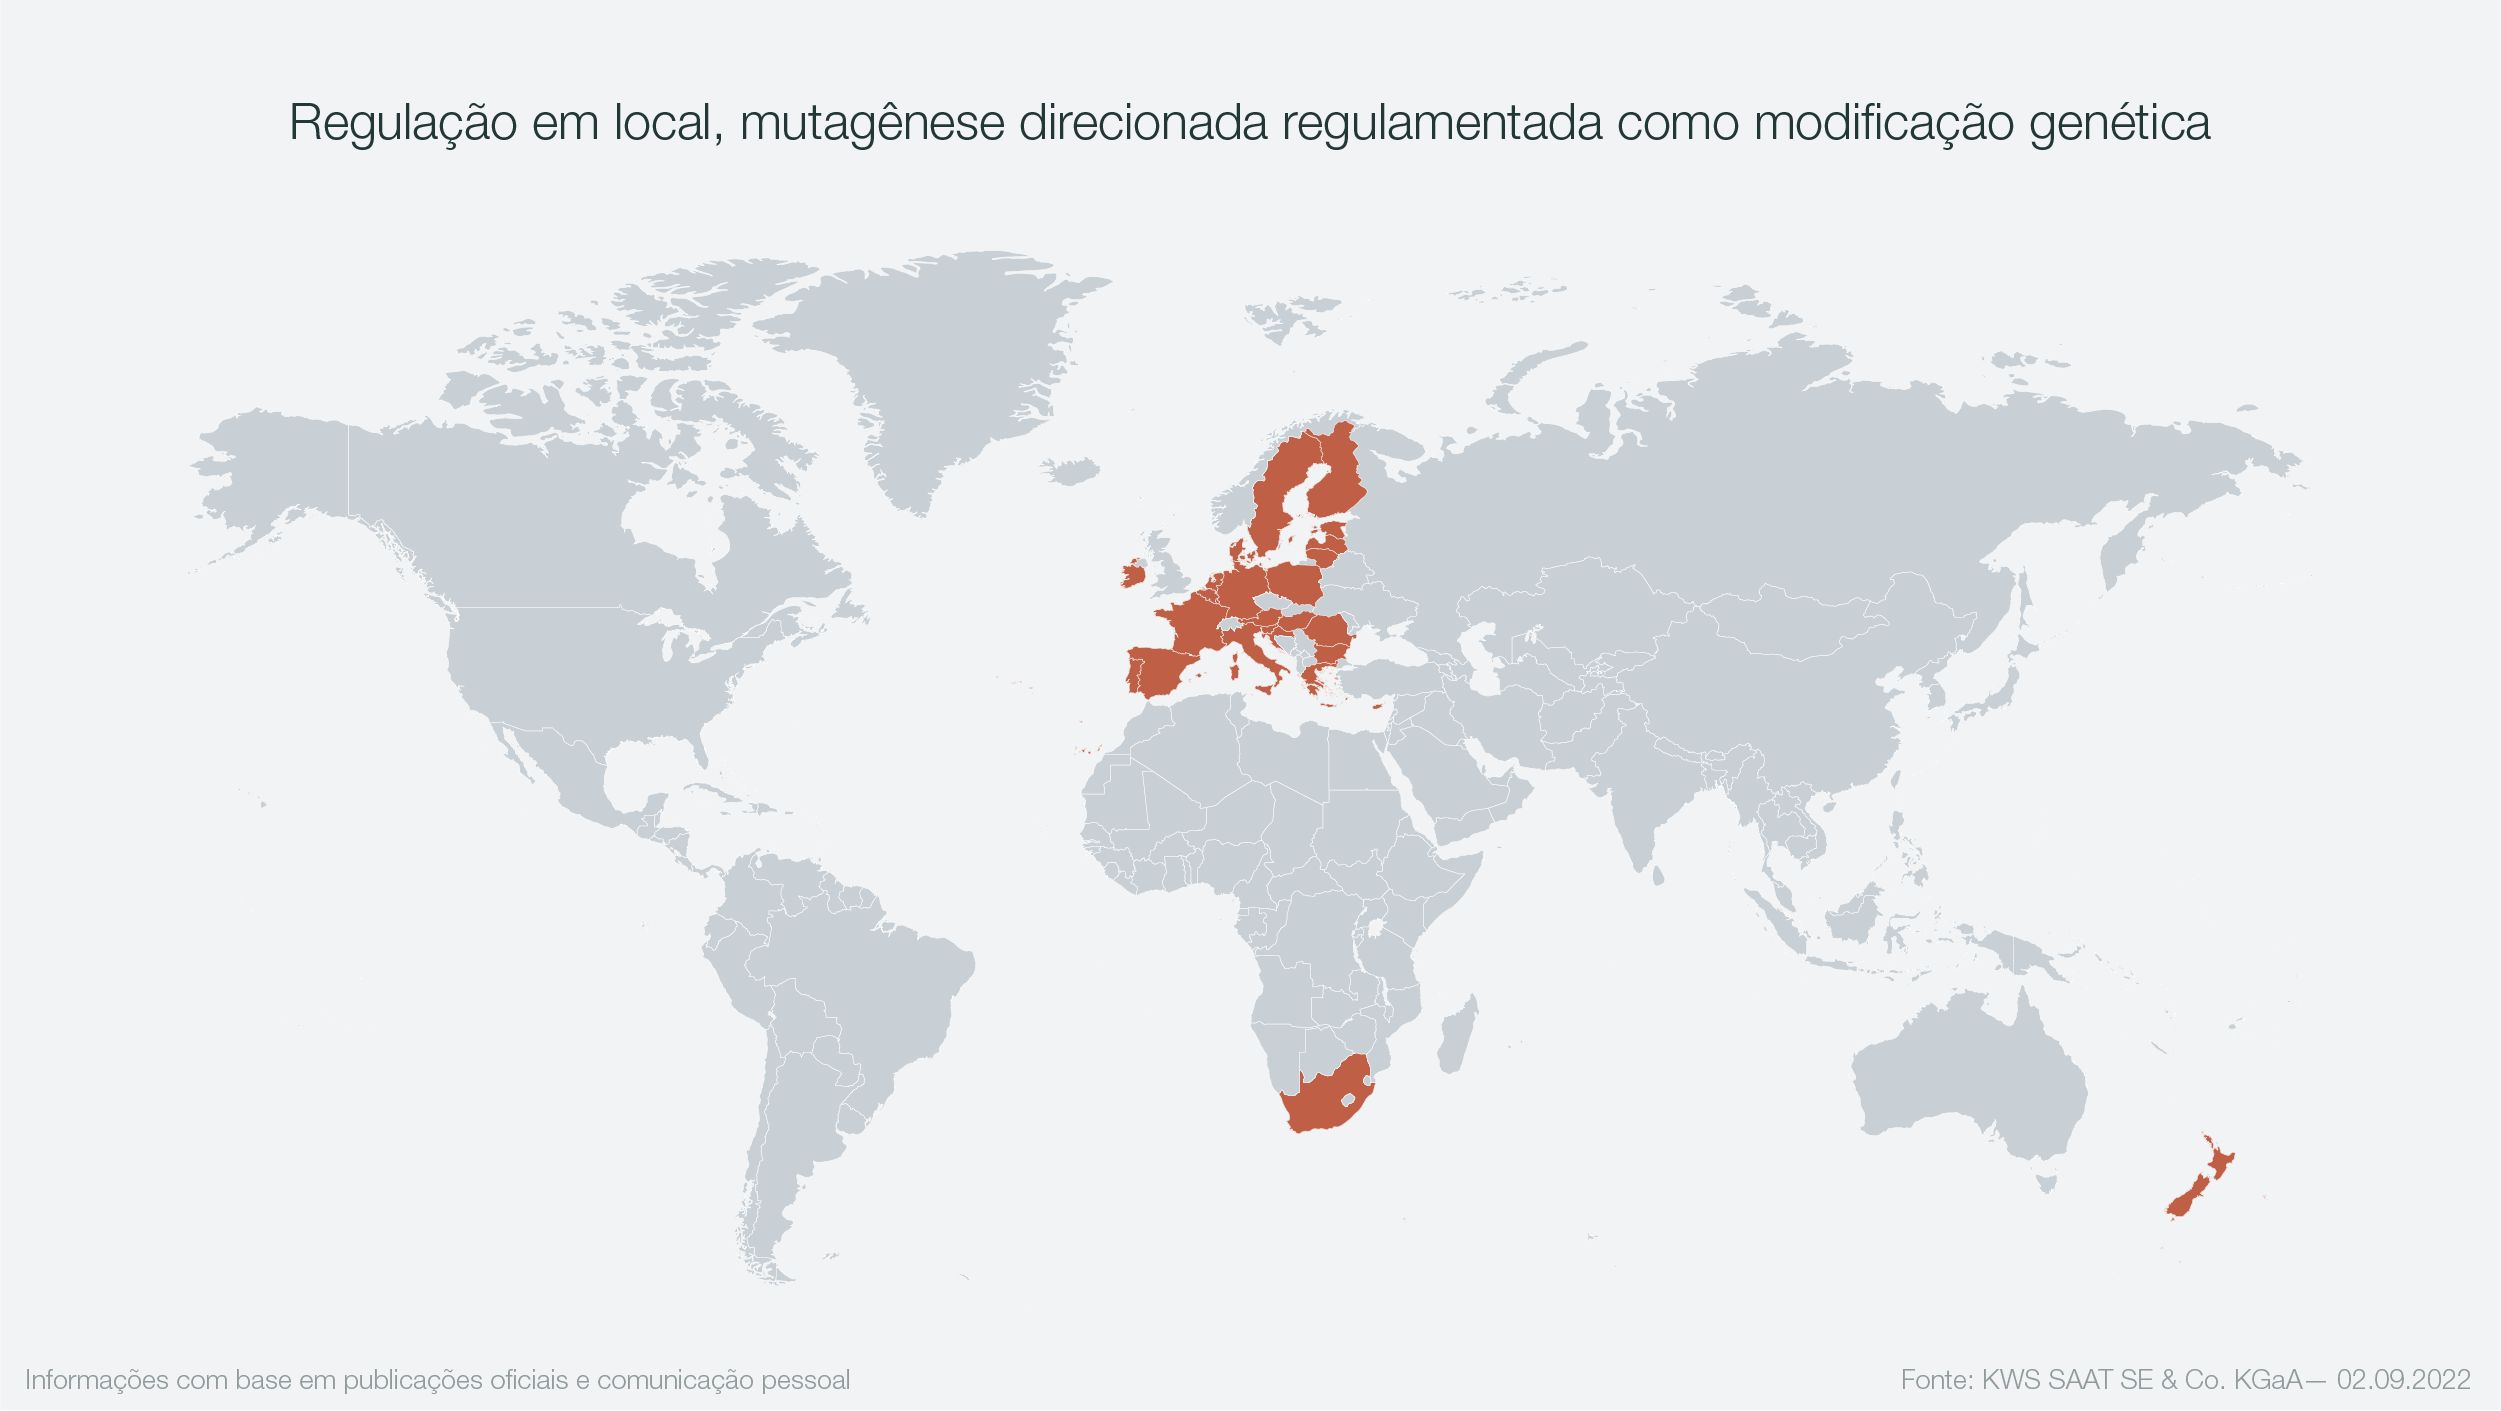 KWS Infographic Nr. 3 showing countries with regulation in place (targeted mutagenisis)